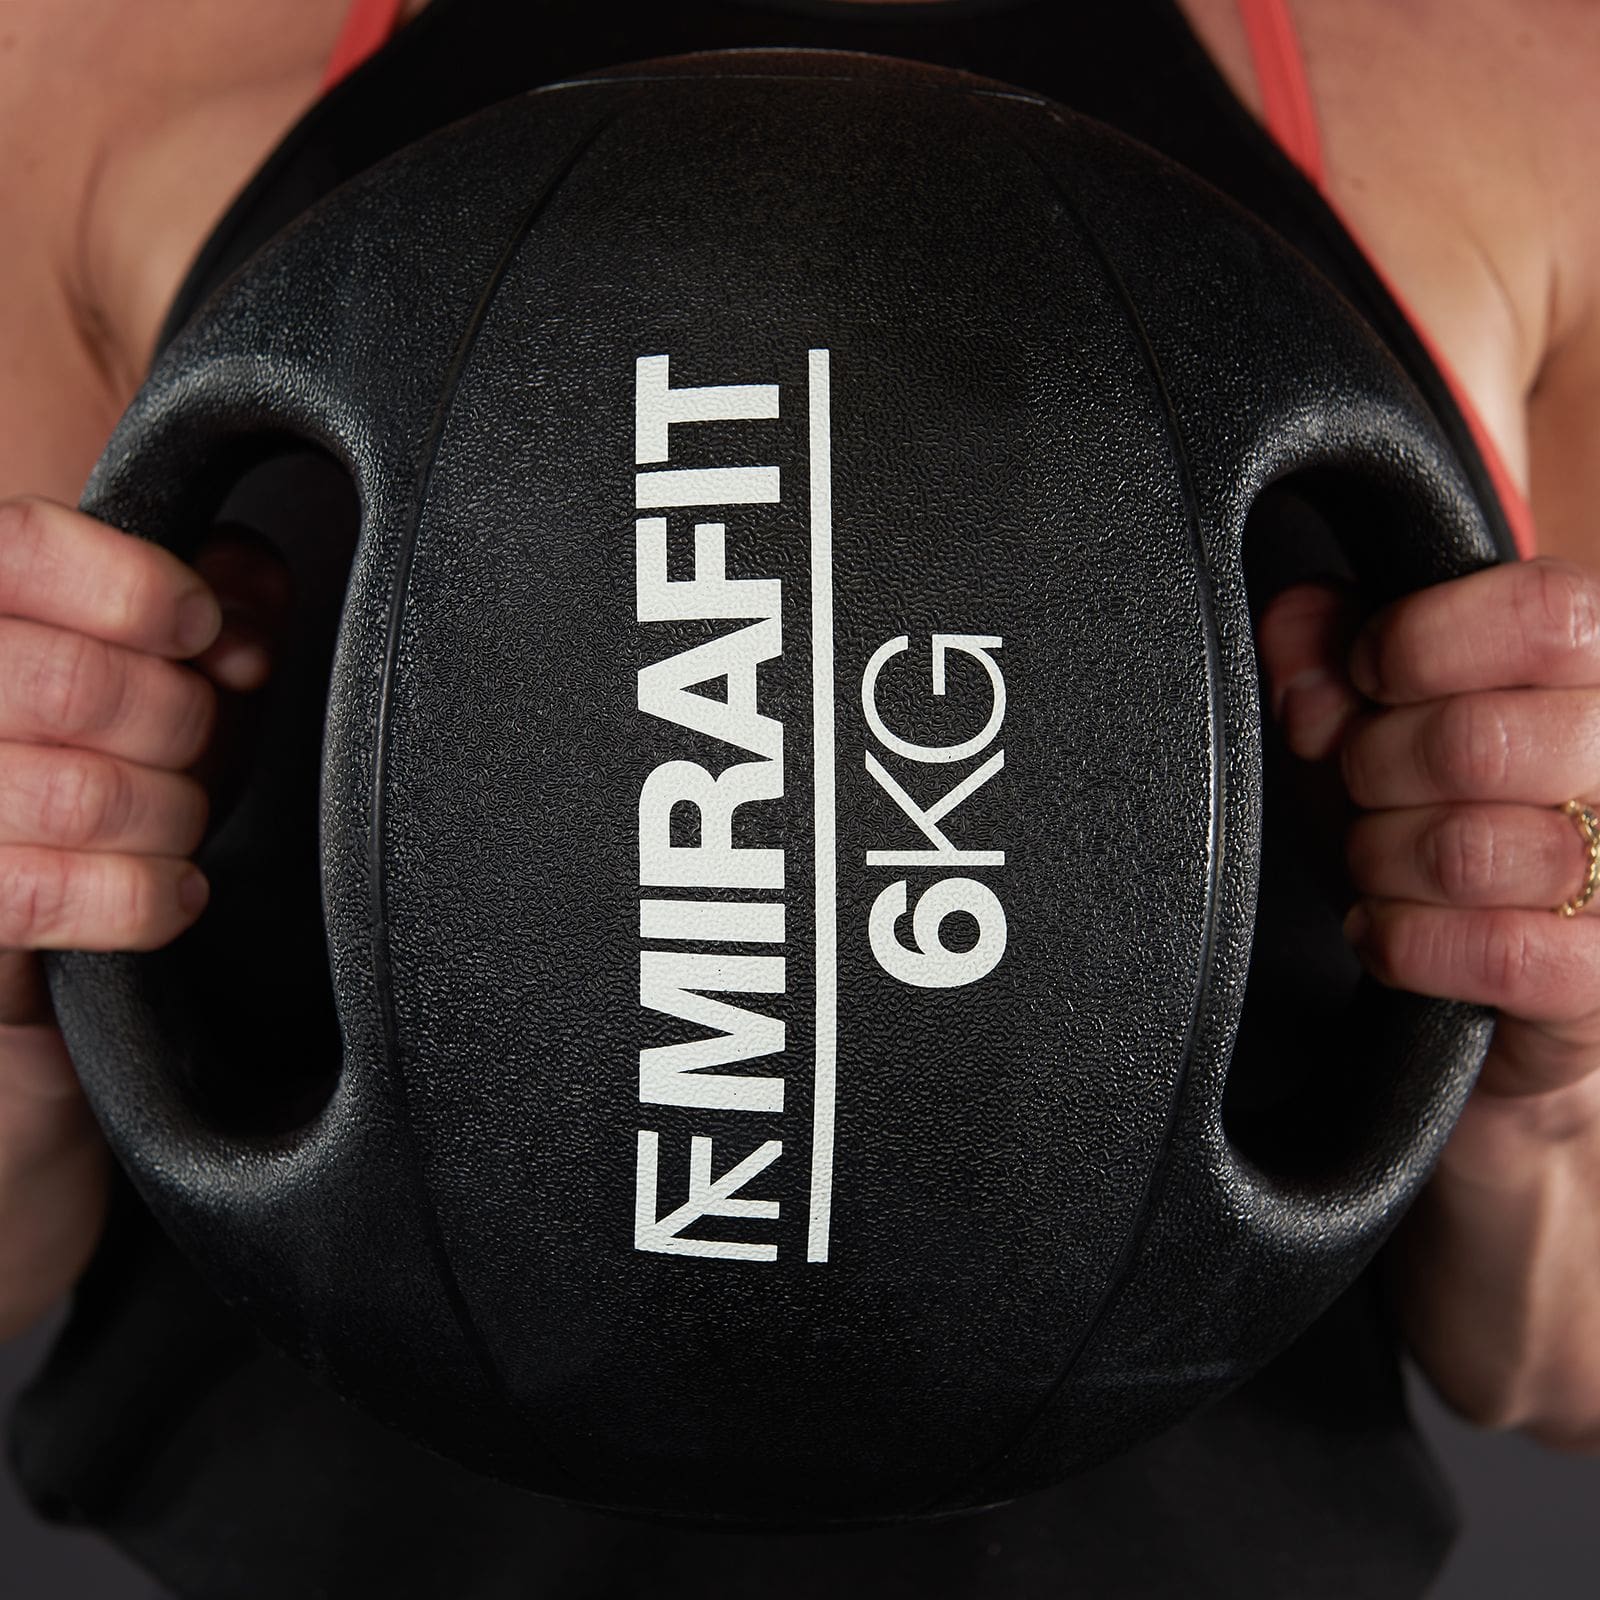 Weights of the Mirafit medicine ball with handles 6kg